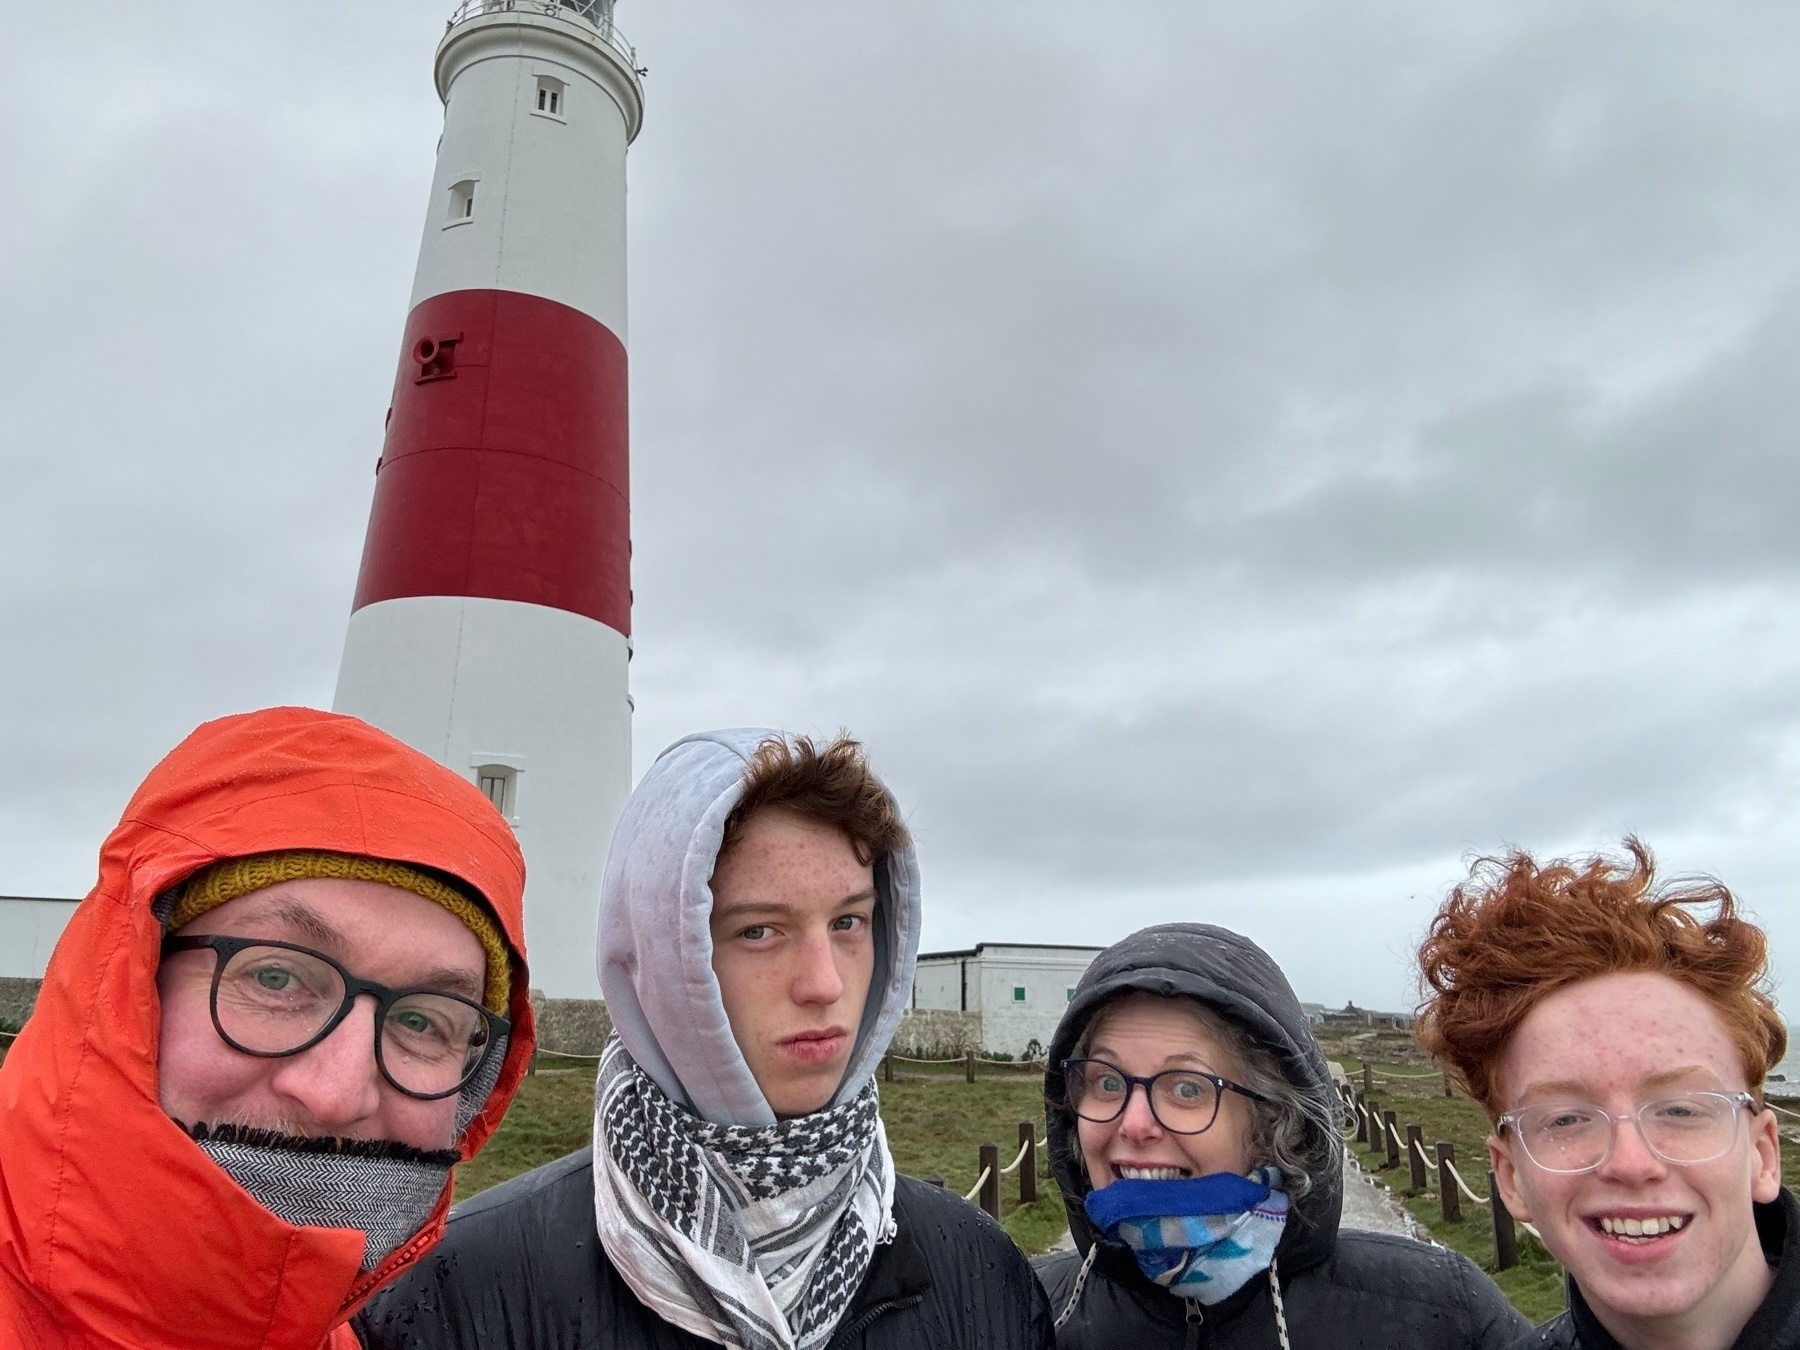 Four individuals standing in front of a lighthouse, with overcast skies in the background. The lighthouse is white with a red band near the top. The people are dressed in cold-weather clothing, with hoods and scarves.